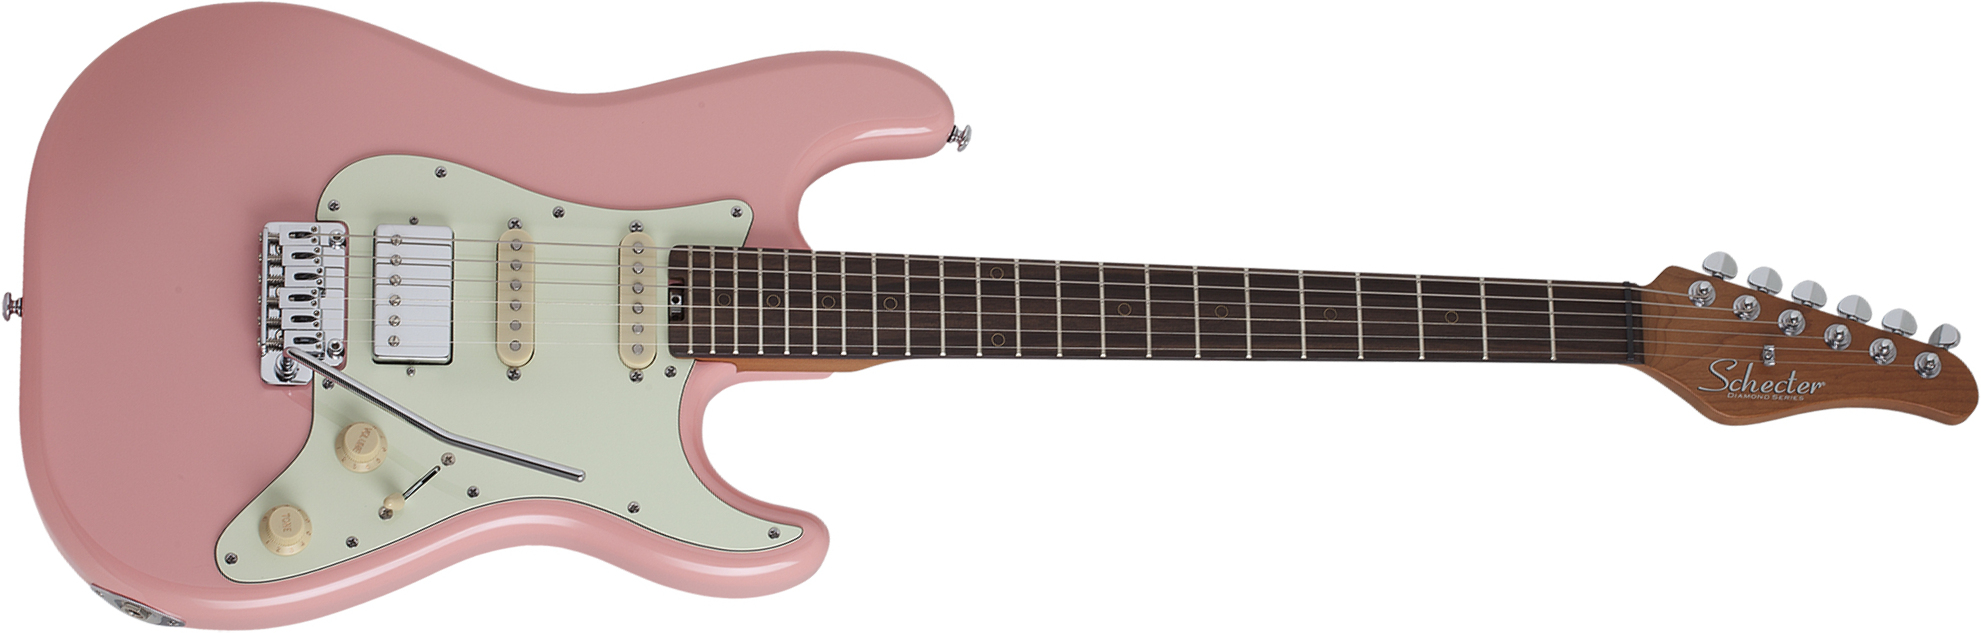 Schecter Nick Johnston Traditional Hss Signature Trem Eb - Atomic Coral - Str shape electric guitar - Main picture